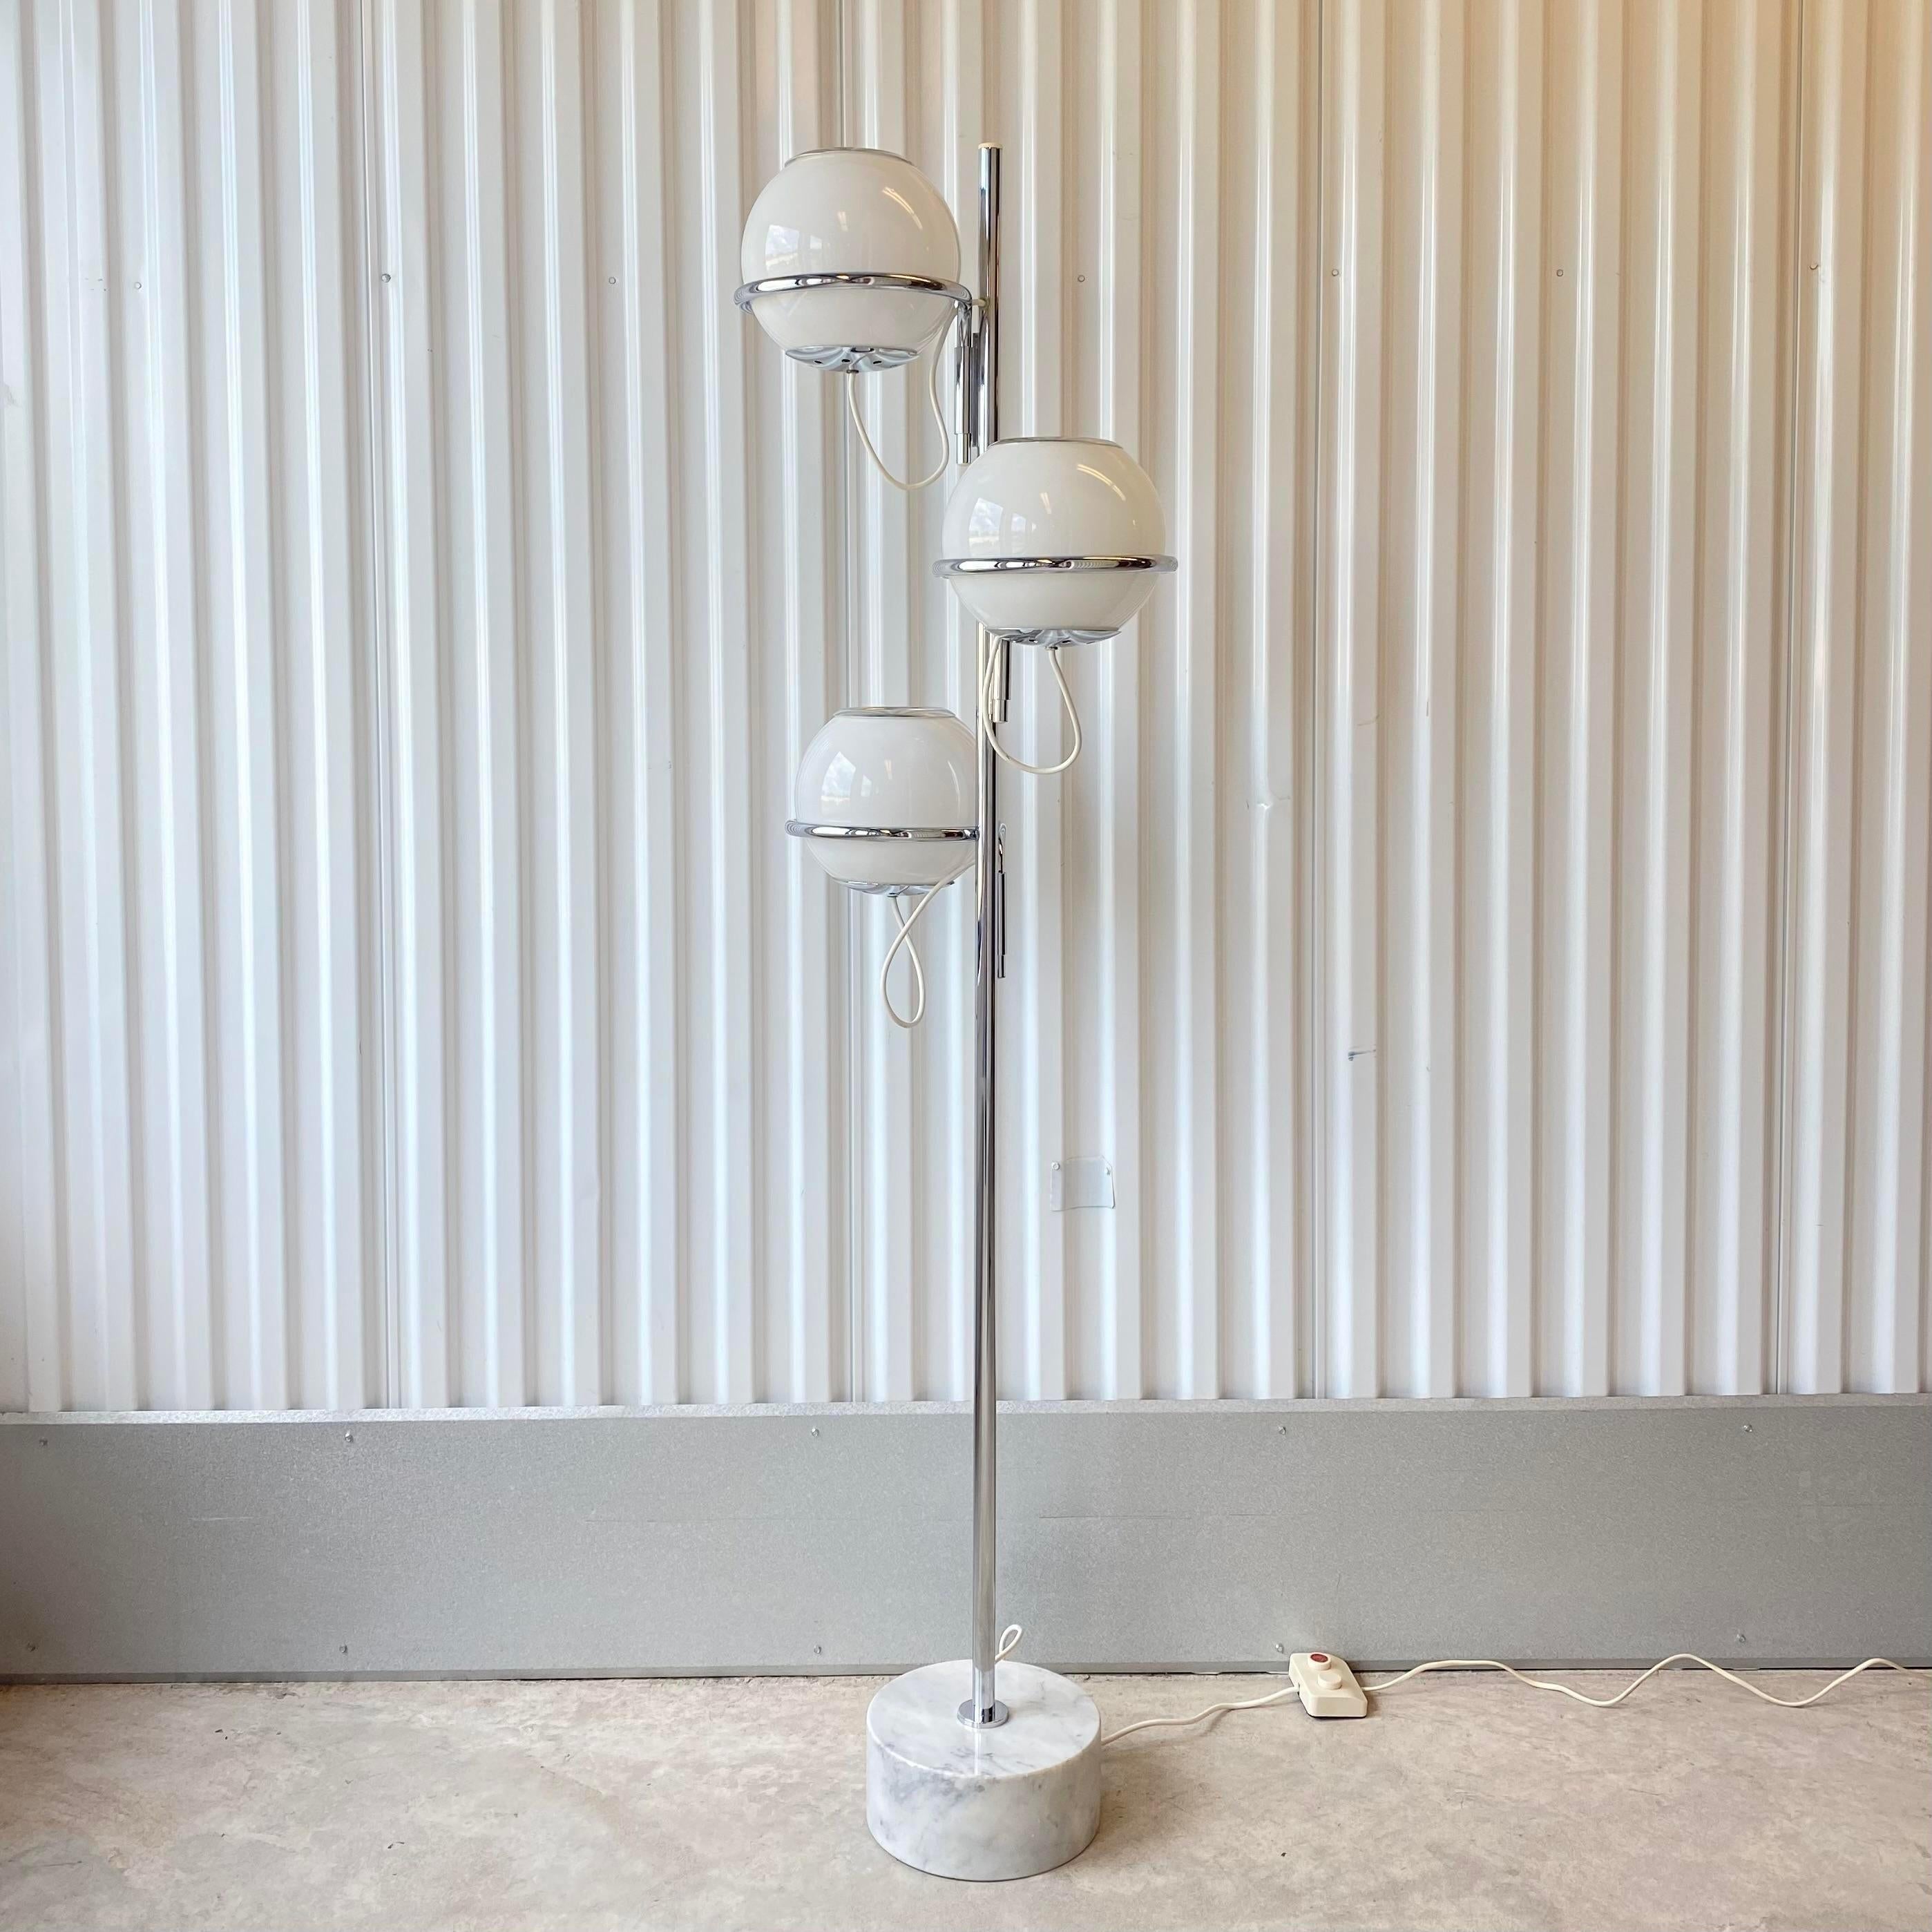 Vintage circa 1960s Italian floor lamp by Goffredo Reggiani.
Each orb has bulbs inside and on the top allowing them to be lit from the inside and top.
Easily position and direct the light in any direction.
The inside and outside lights of the